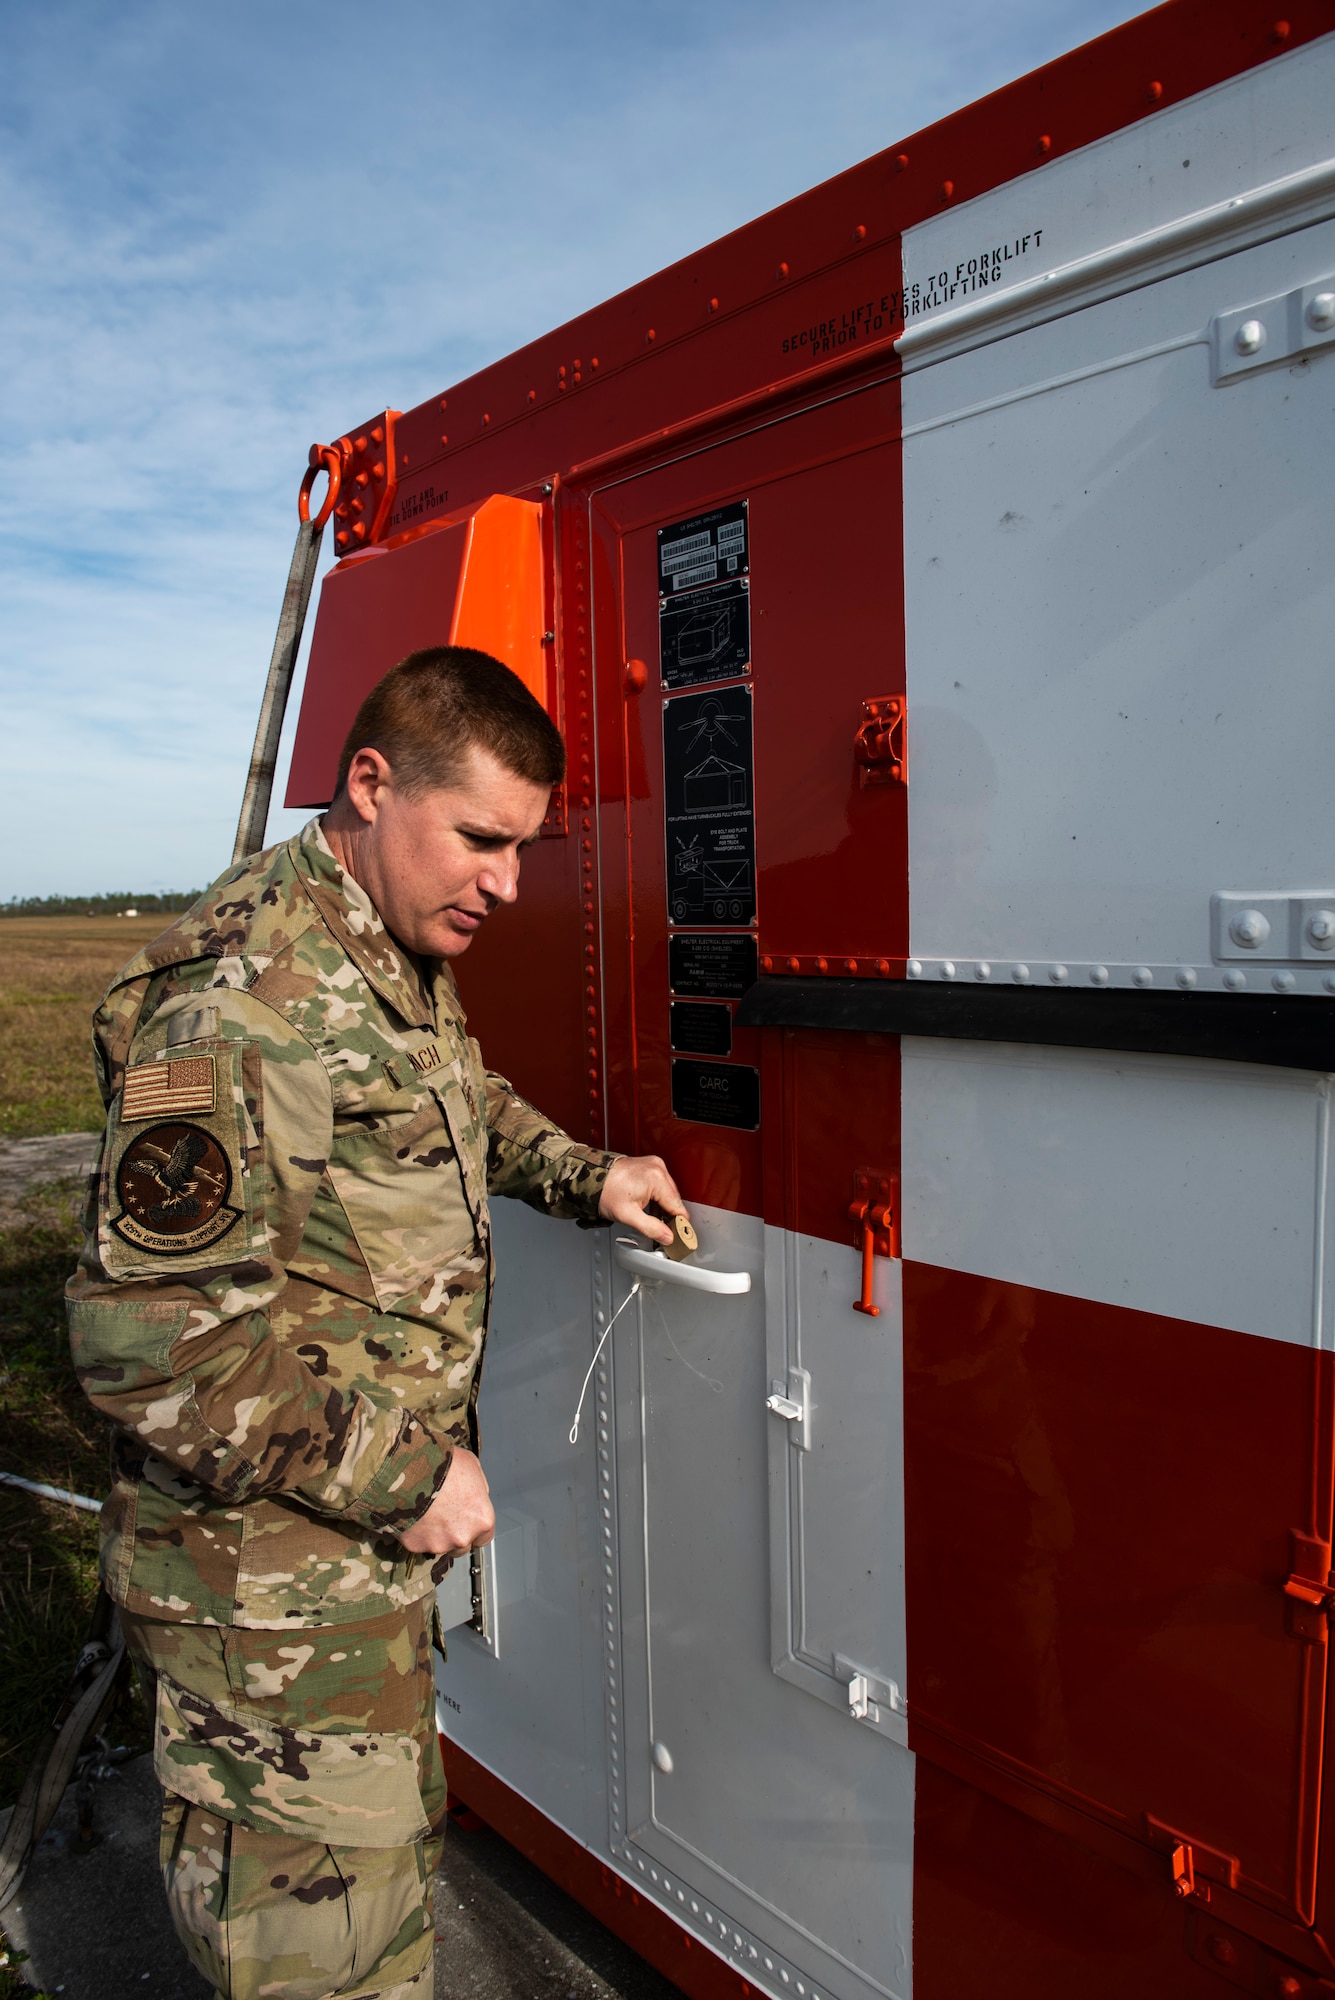 U.S. Air Force Staff Sgt. Christopher Kiebach, 325th Operations Support Squadron Radar, Airfield, and Weather Systems supervisor, locks up a critical resource at Tyndall Air Force Base, Florida, Nov. 26, 2019. Kiebach, originally from Sierra Vista, Arizona, was selected to represent the 325th Operations Group during the month's Airman Shadow program, which embeds with wing commander into a unit to see how Airmen perform day-to-day duties in support of the 325th Fighter Wing mission. (U.S. Air Force photo by Staff Sgt. Magen M. Reeves)